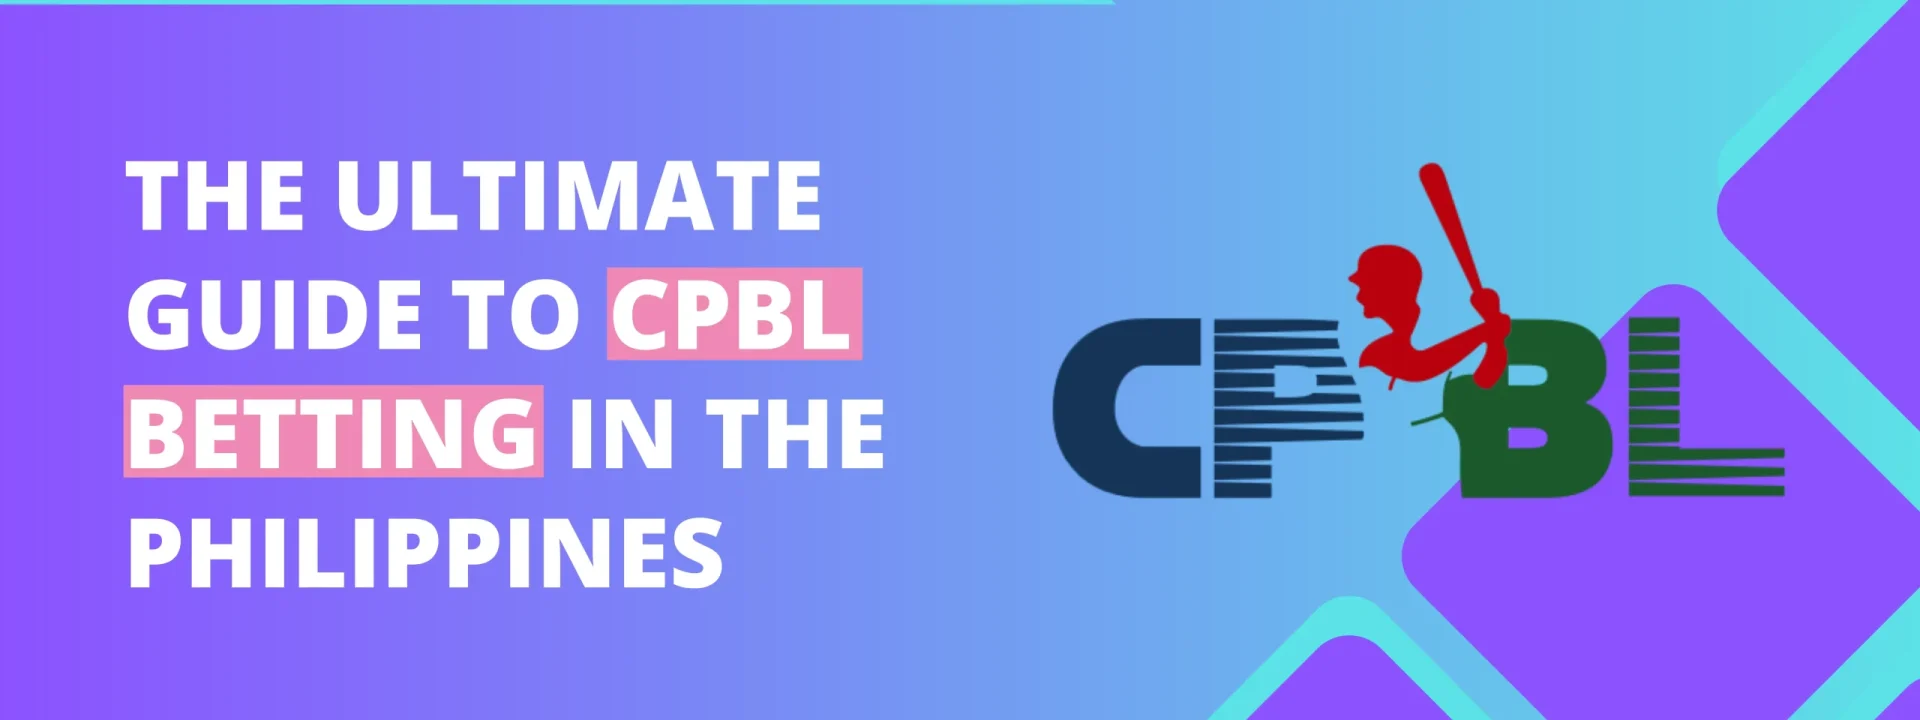 The Ultimate Guide to CPBL Betting in the Philippines